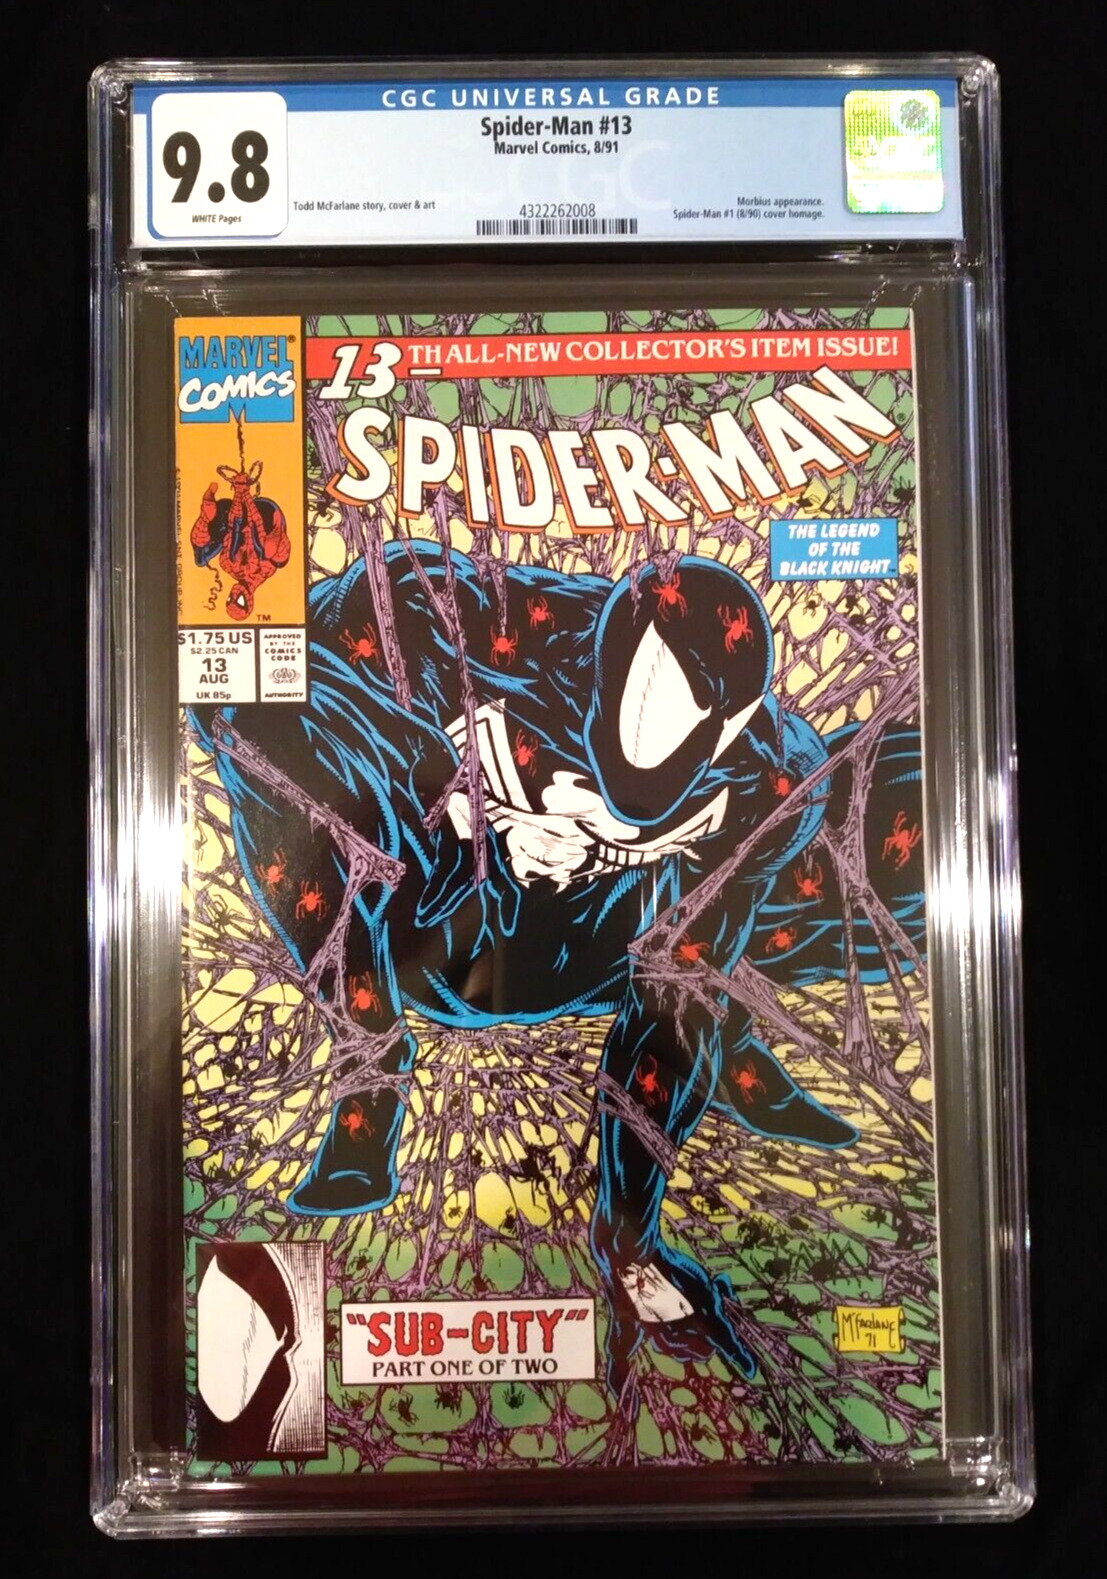 Spider-Man #13, CGC 9.8, Marvel Direct, August 1991, McFarlane cover homage